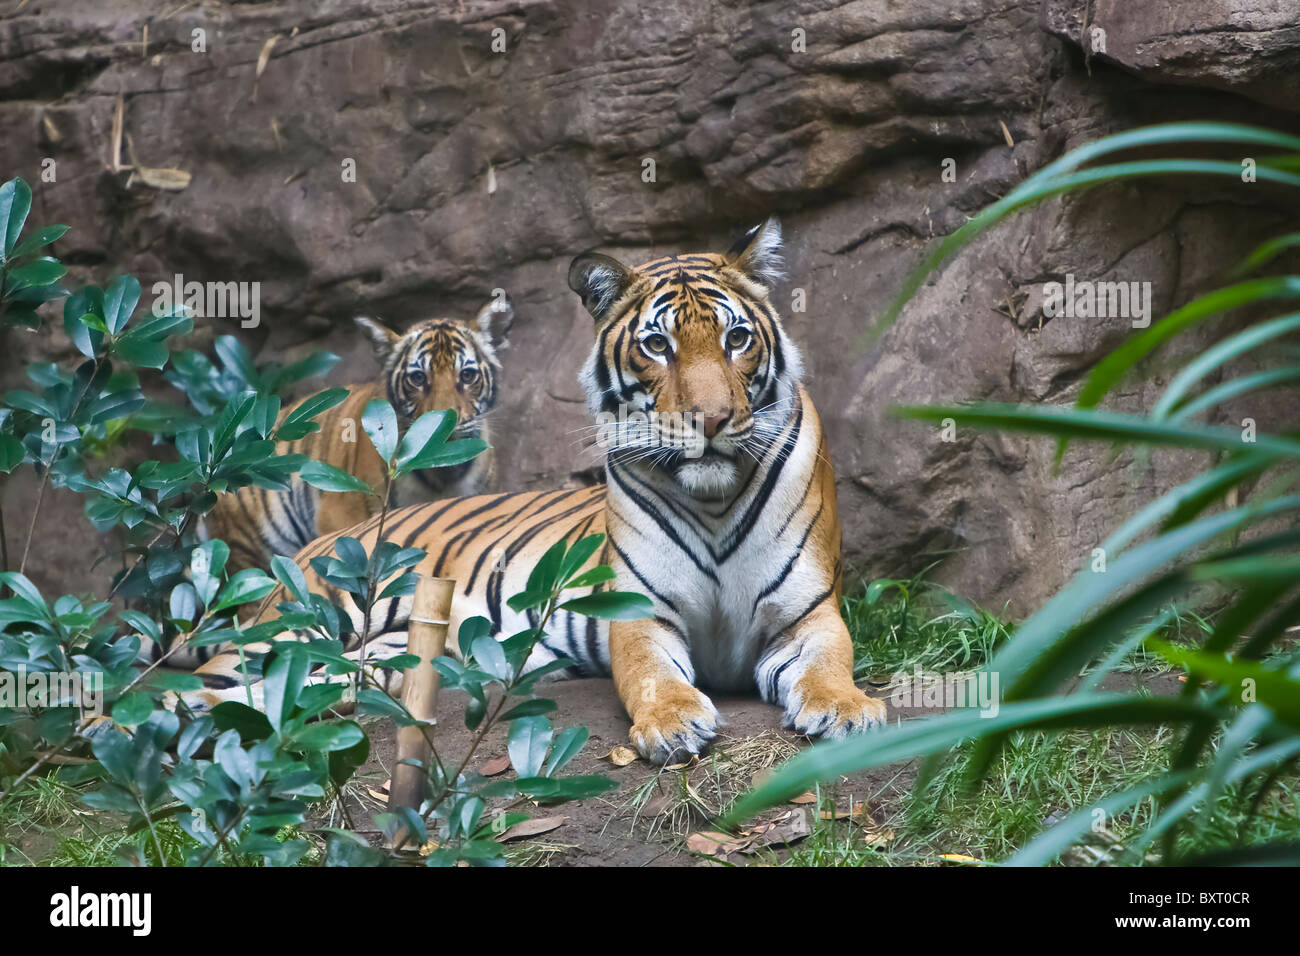 Malayan female tiger and cubs on exhibit at the San Diego Zoo, CA US. This is perhaps the smallest subspecies of tiger. Its stripe pattern is similar to the Indochinese tiger but its size is closer to the Sumatran tigers with average weight of 120 kg for adult males and 100 kg for females. [1] Male Malayan tigers measures around 237cm in length from head to tail and female Malayan tigress around 200cm in length. Stock Photo